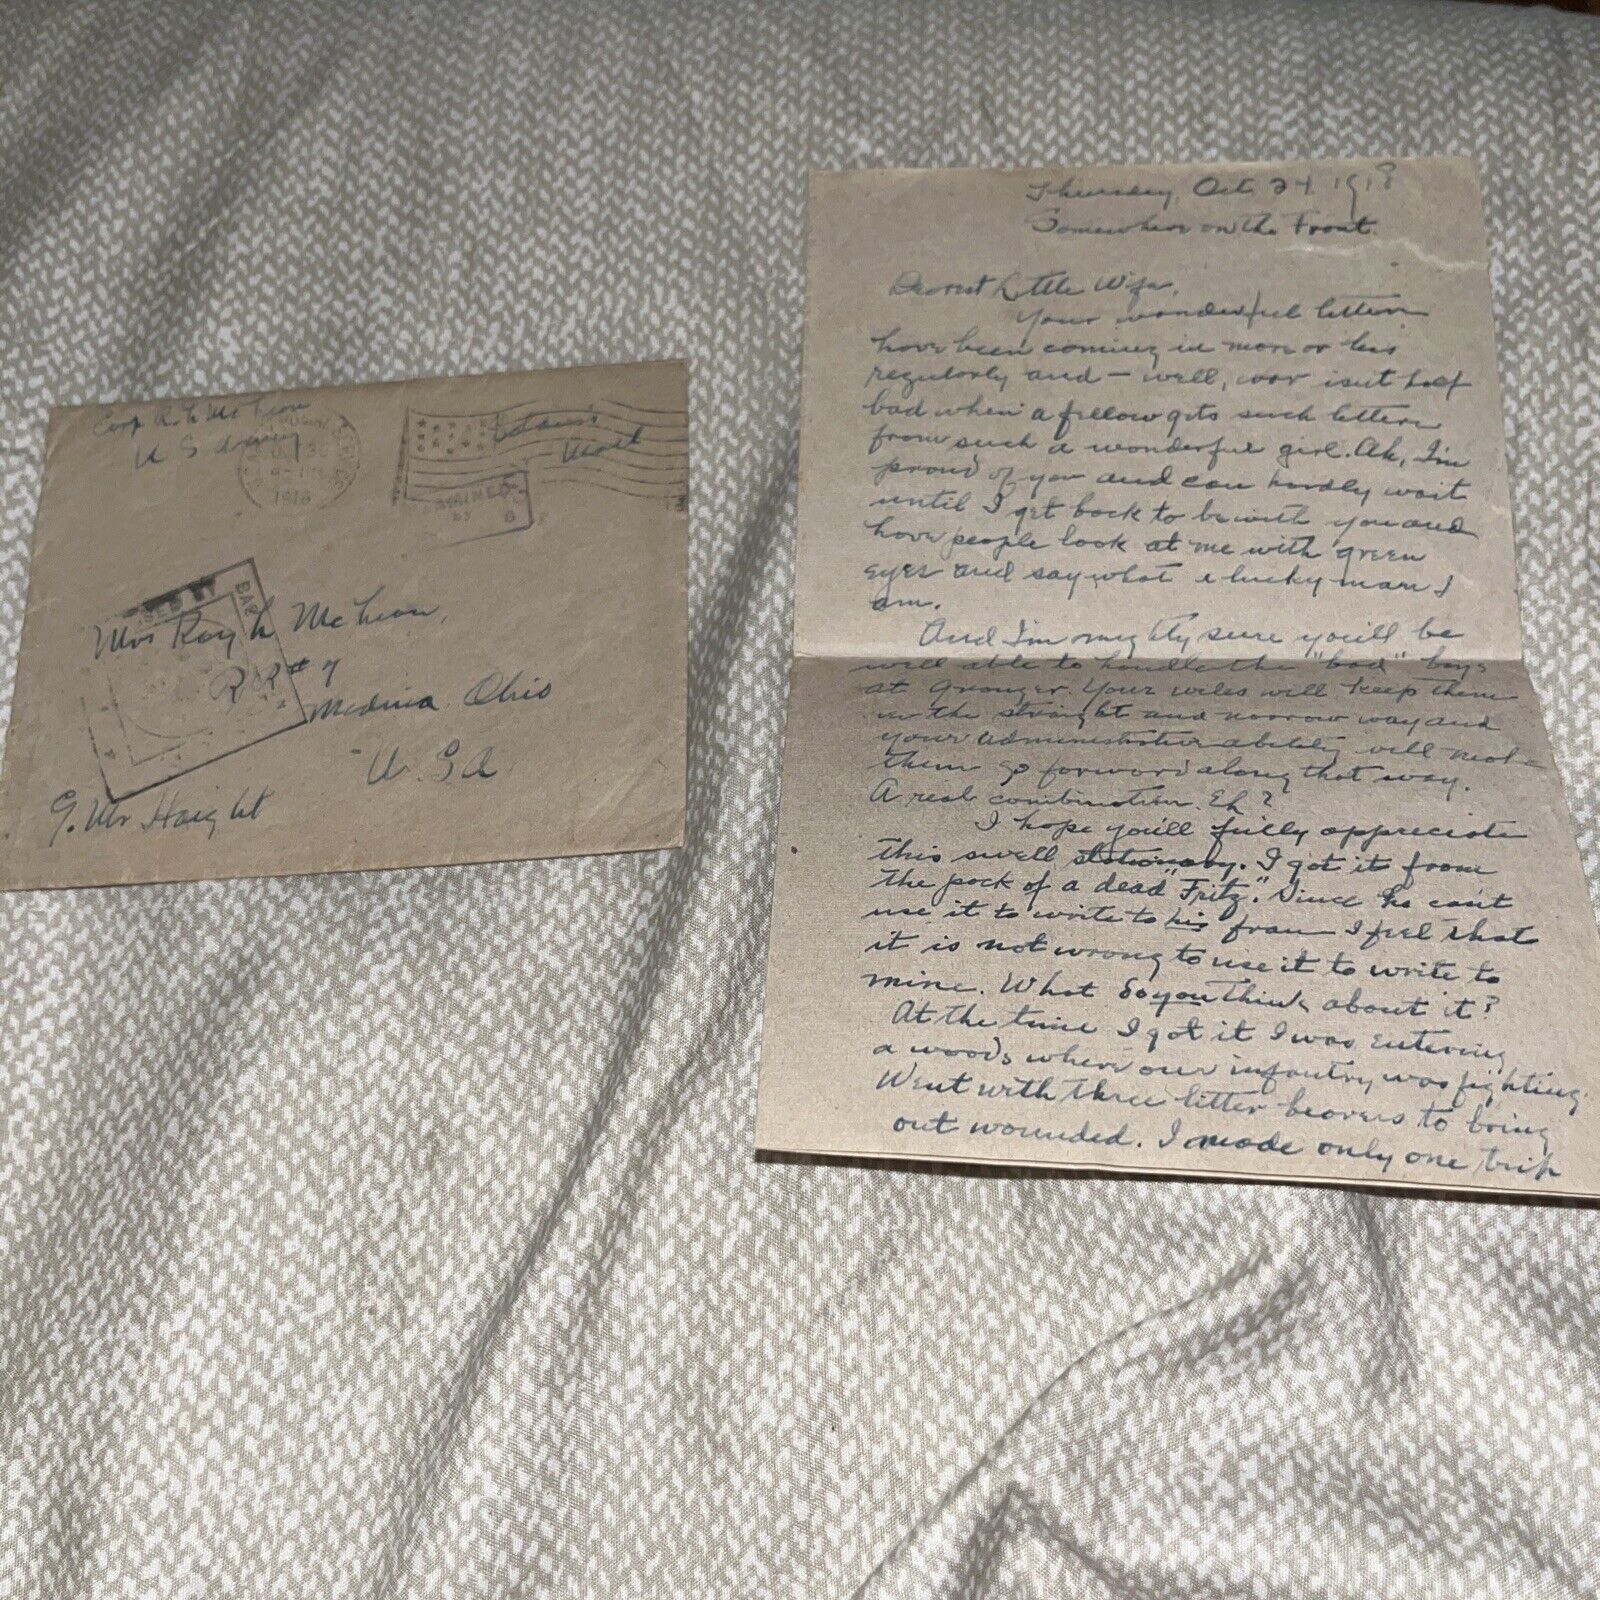 Antique 1918 WWI Soldier’s Letter Home to Ohio OH Wife; Mentions Woodrow Wilson